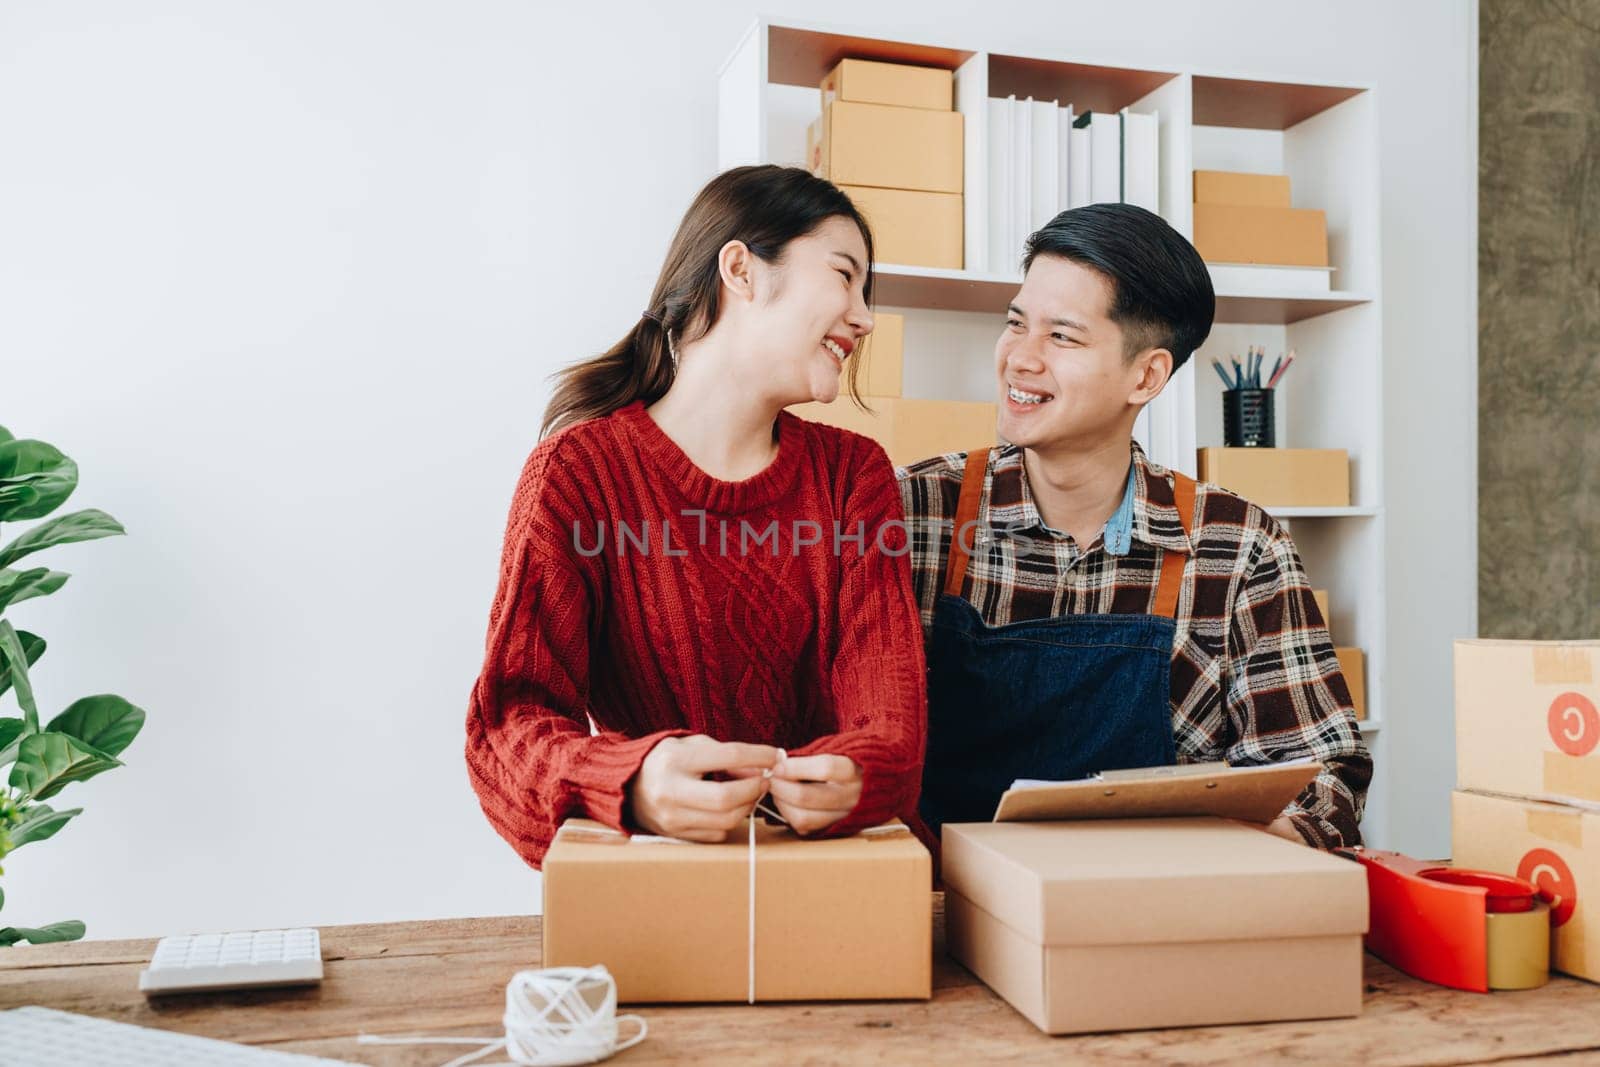 Portrait of Starting small businesses SME owners, family business check online orders Selling products working with boxes freelance work at home office, sme business online small medium enterprise.